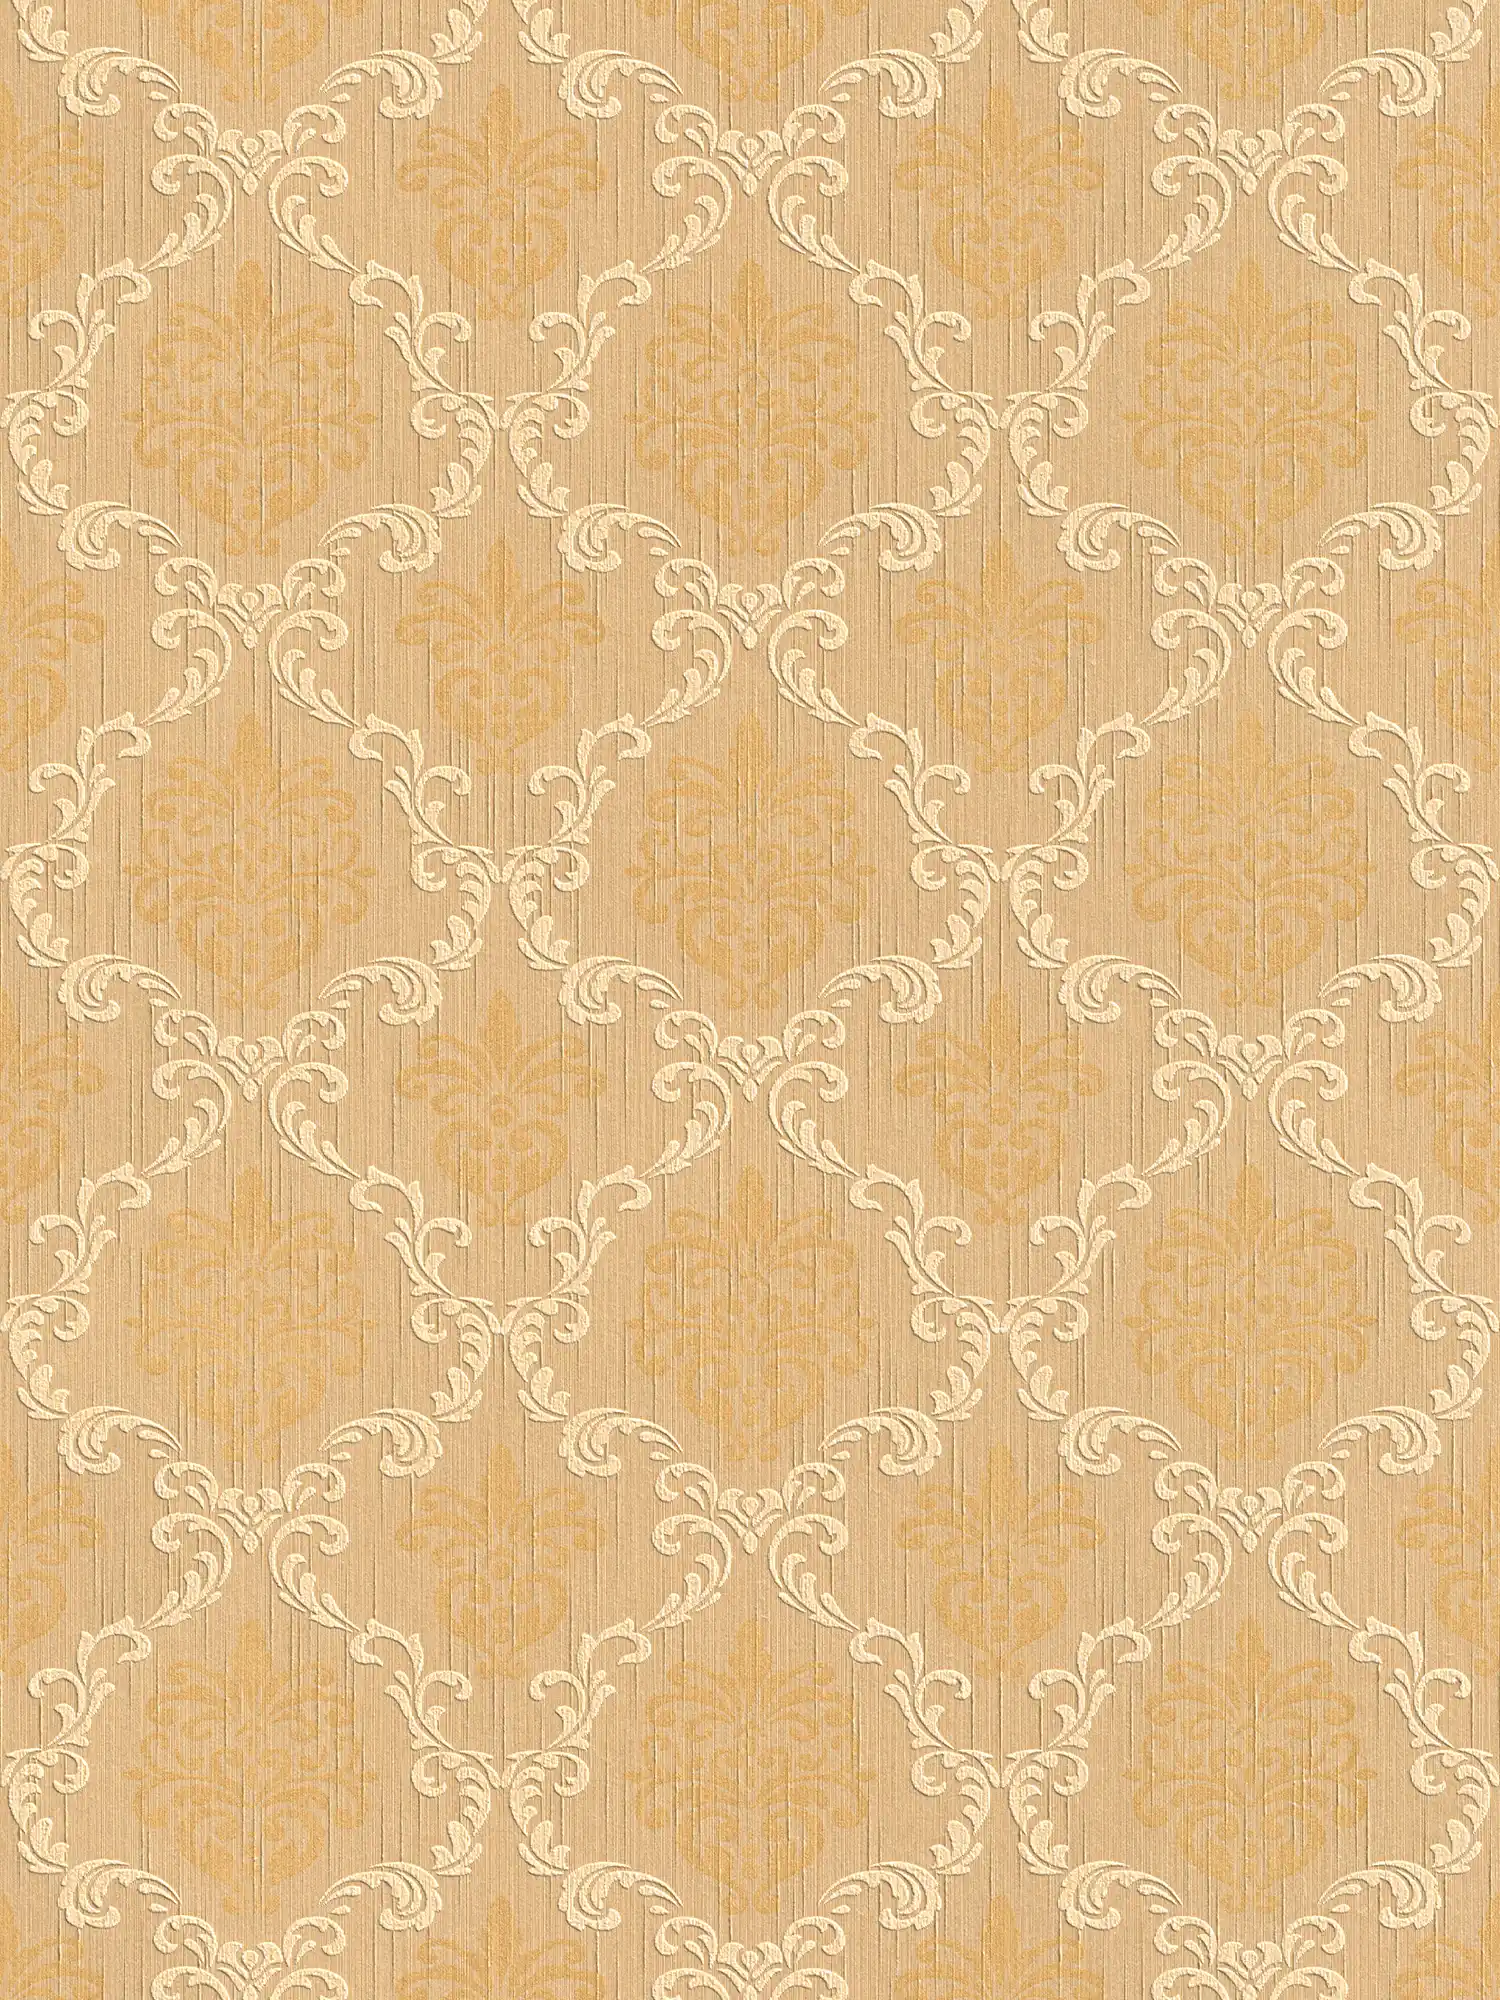 Non-woven wallpaper with textile design & ornaments with texture effect - beige
